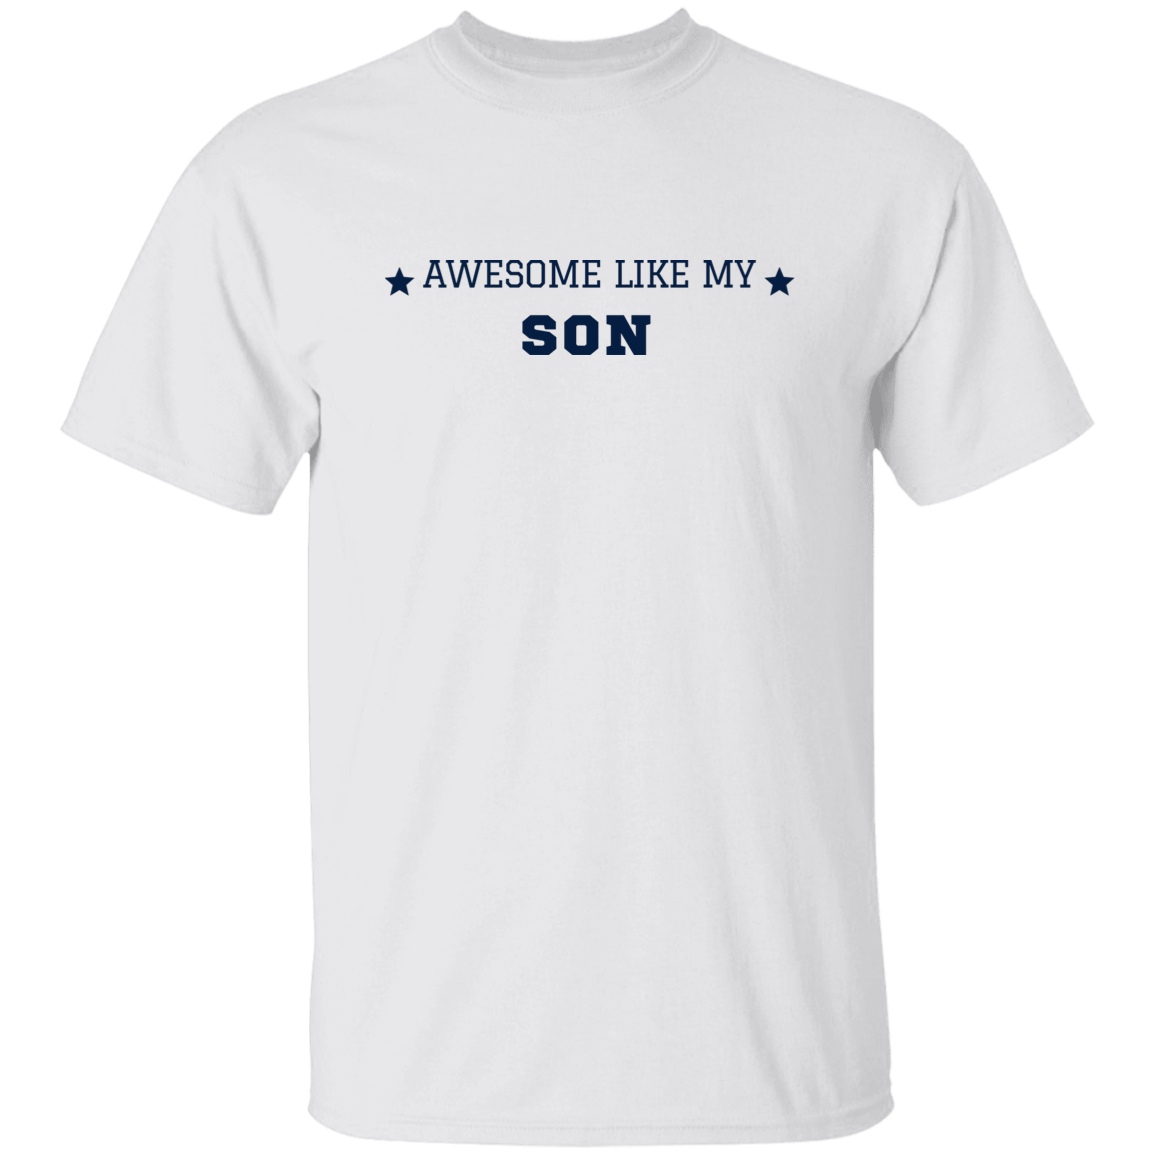 AWESOME LIKE MY SON